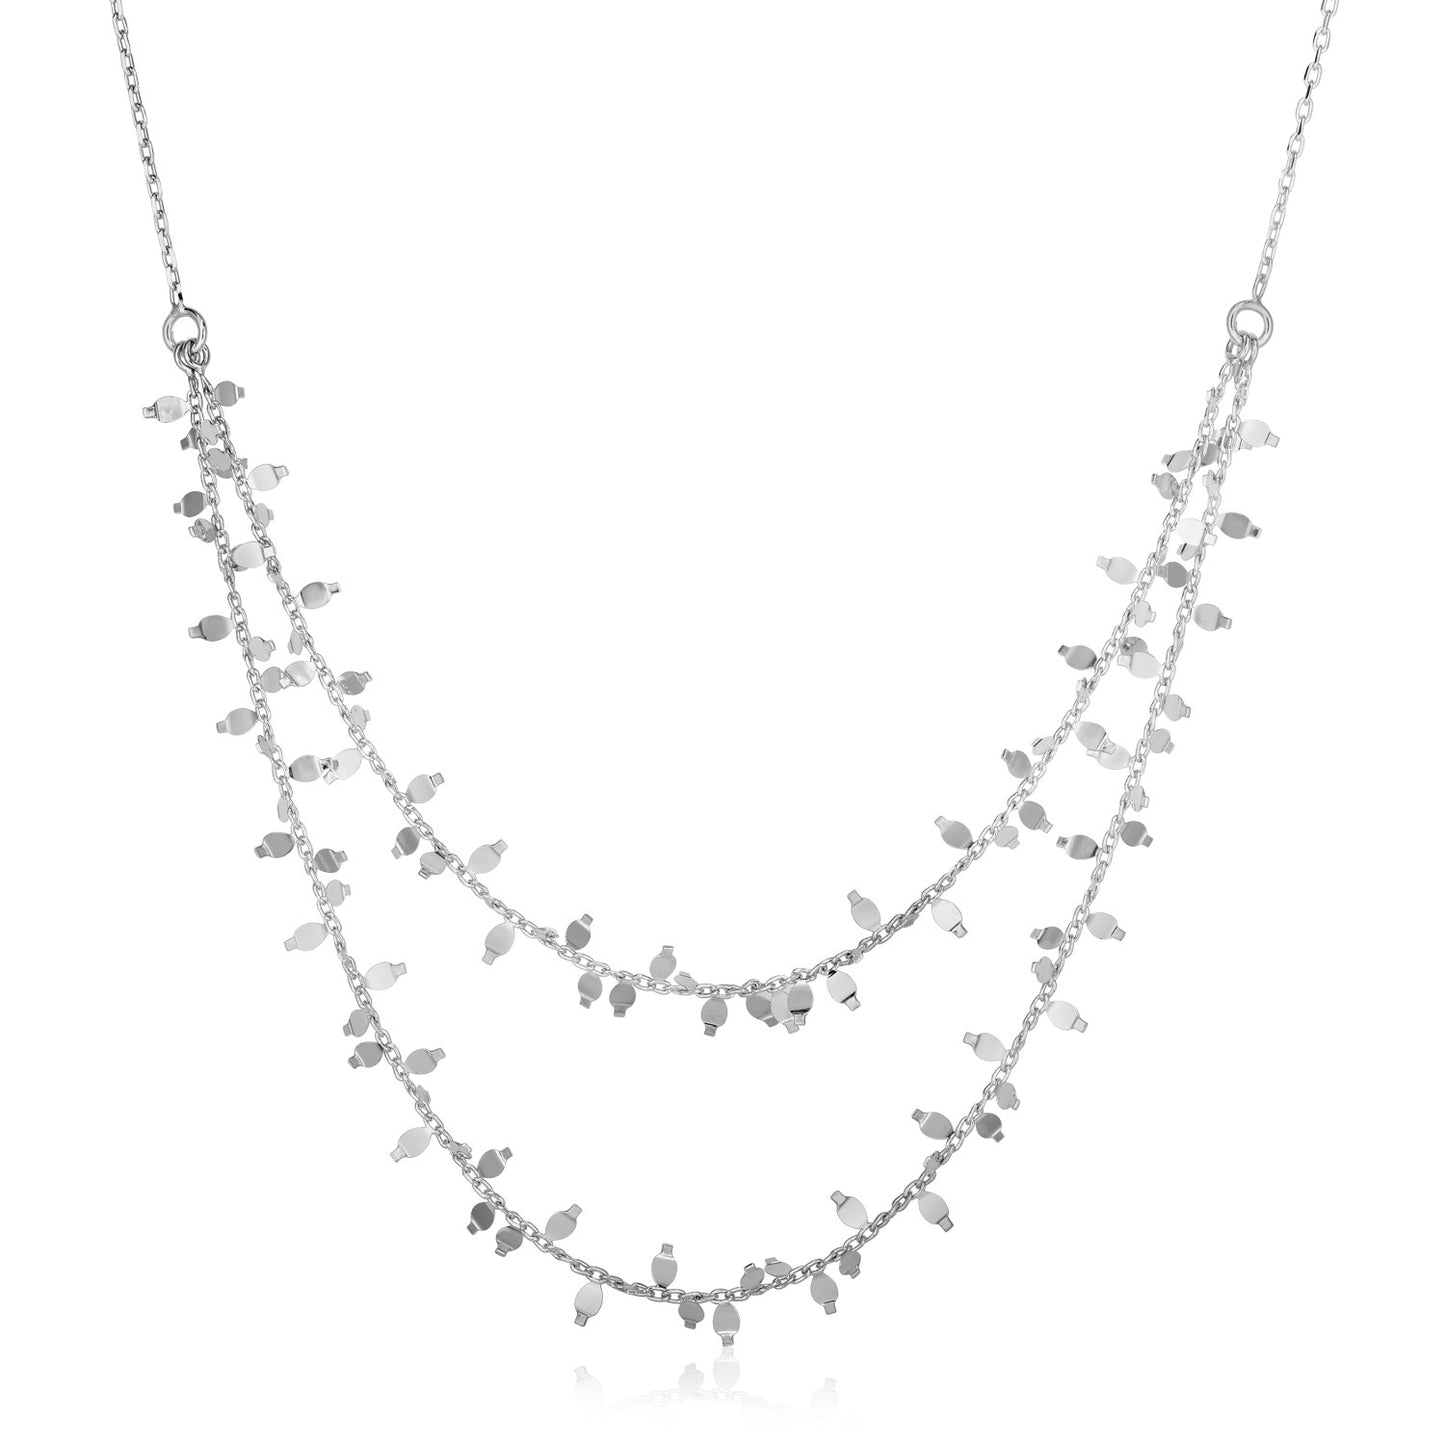 Sterling Silver 18 inch Leaf Motif Double Chain Necklace